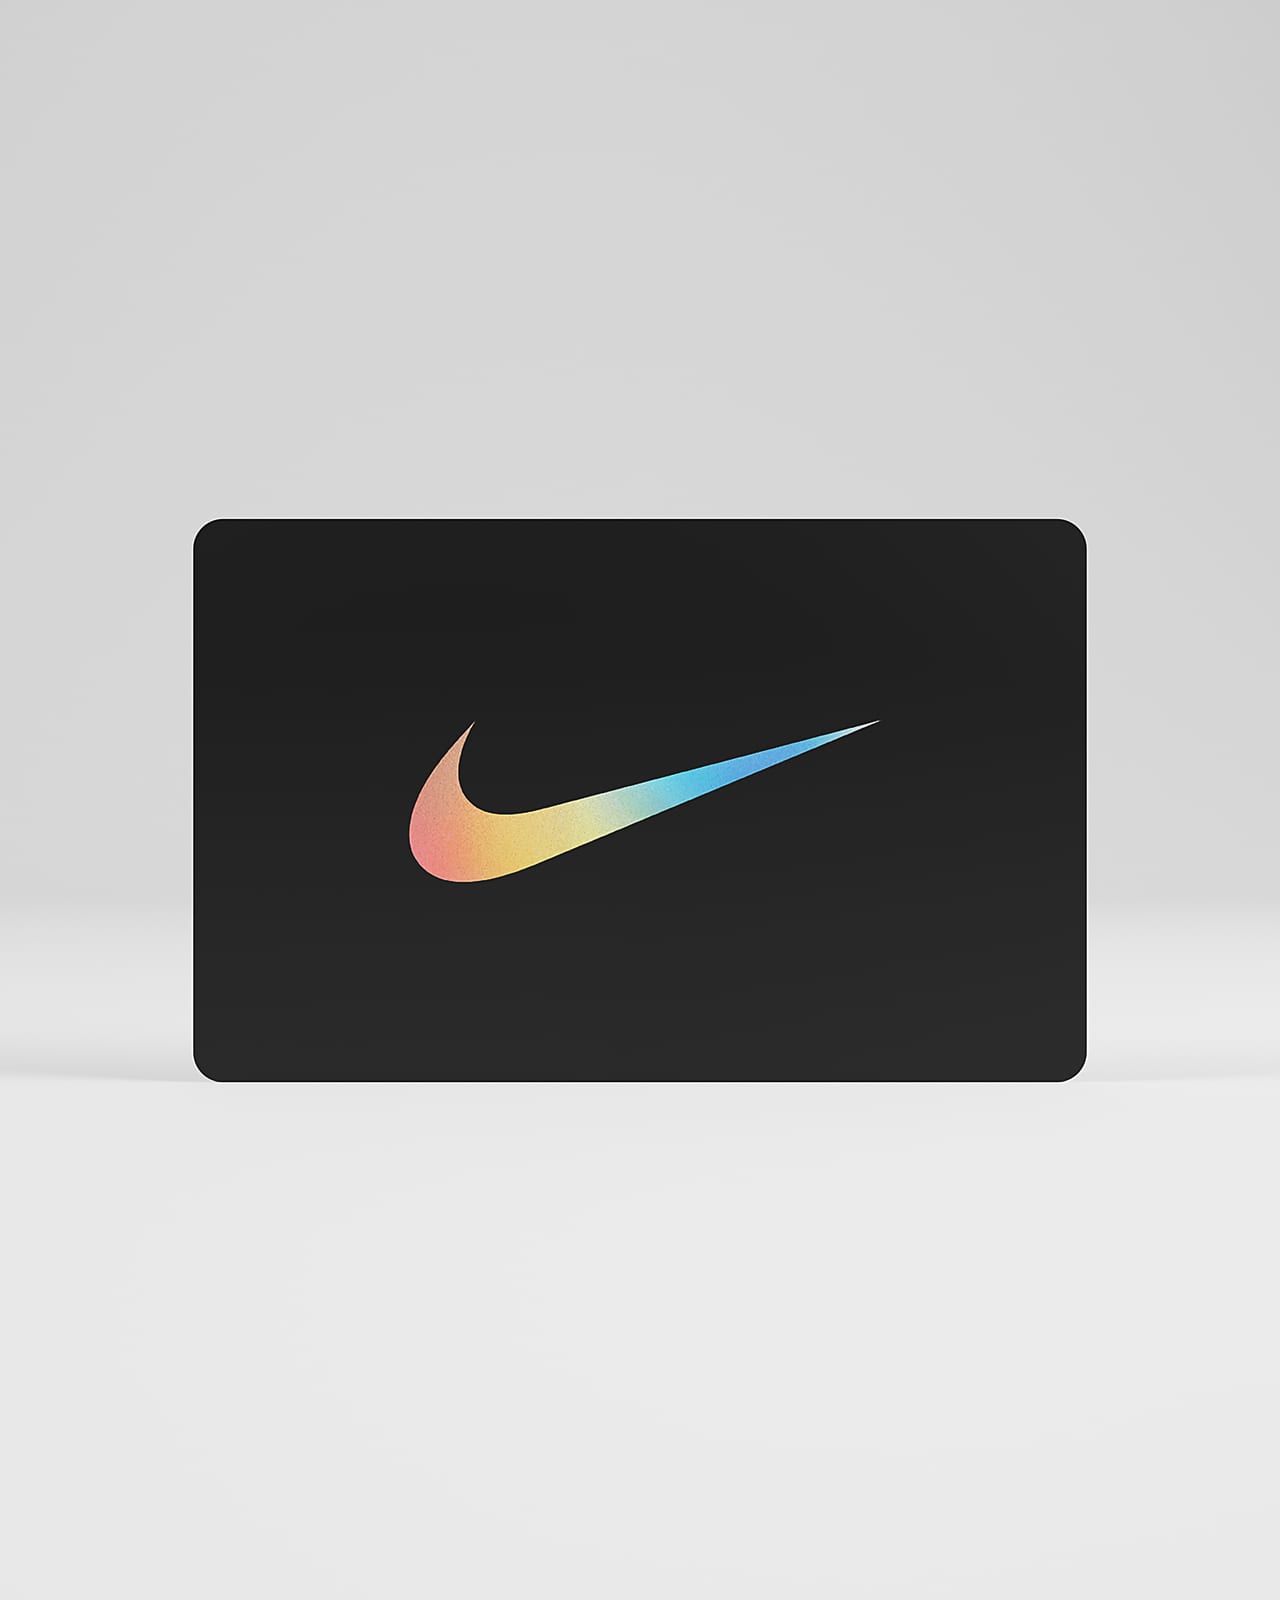 Nike Digital Gift Card Emailed in 2 Hours or Less. Nike.com